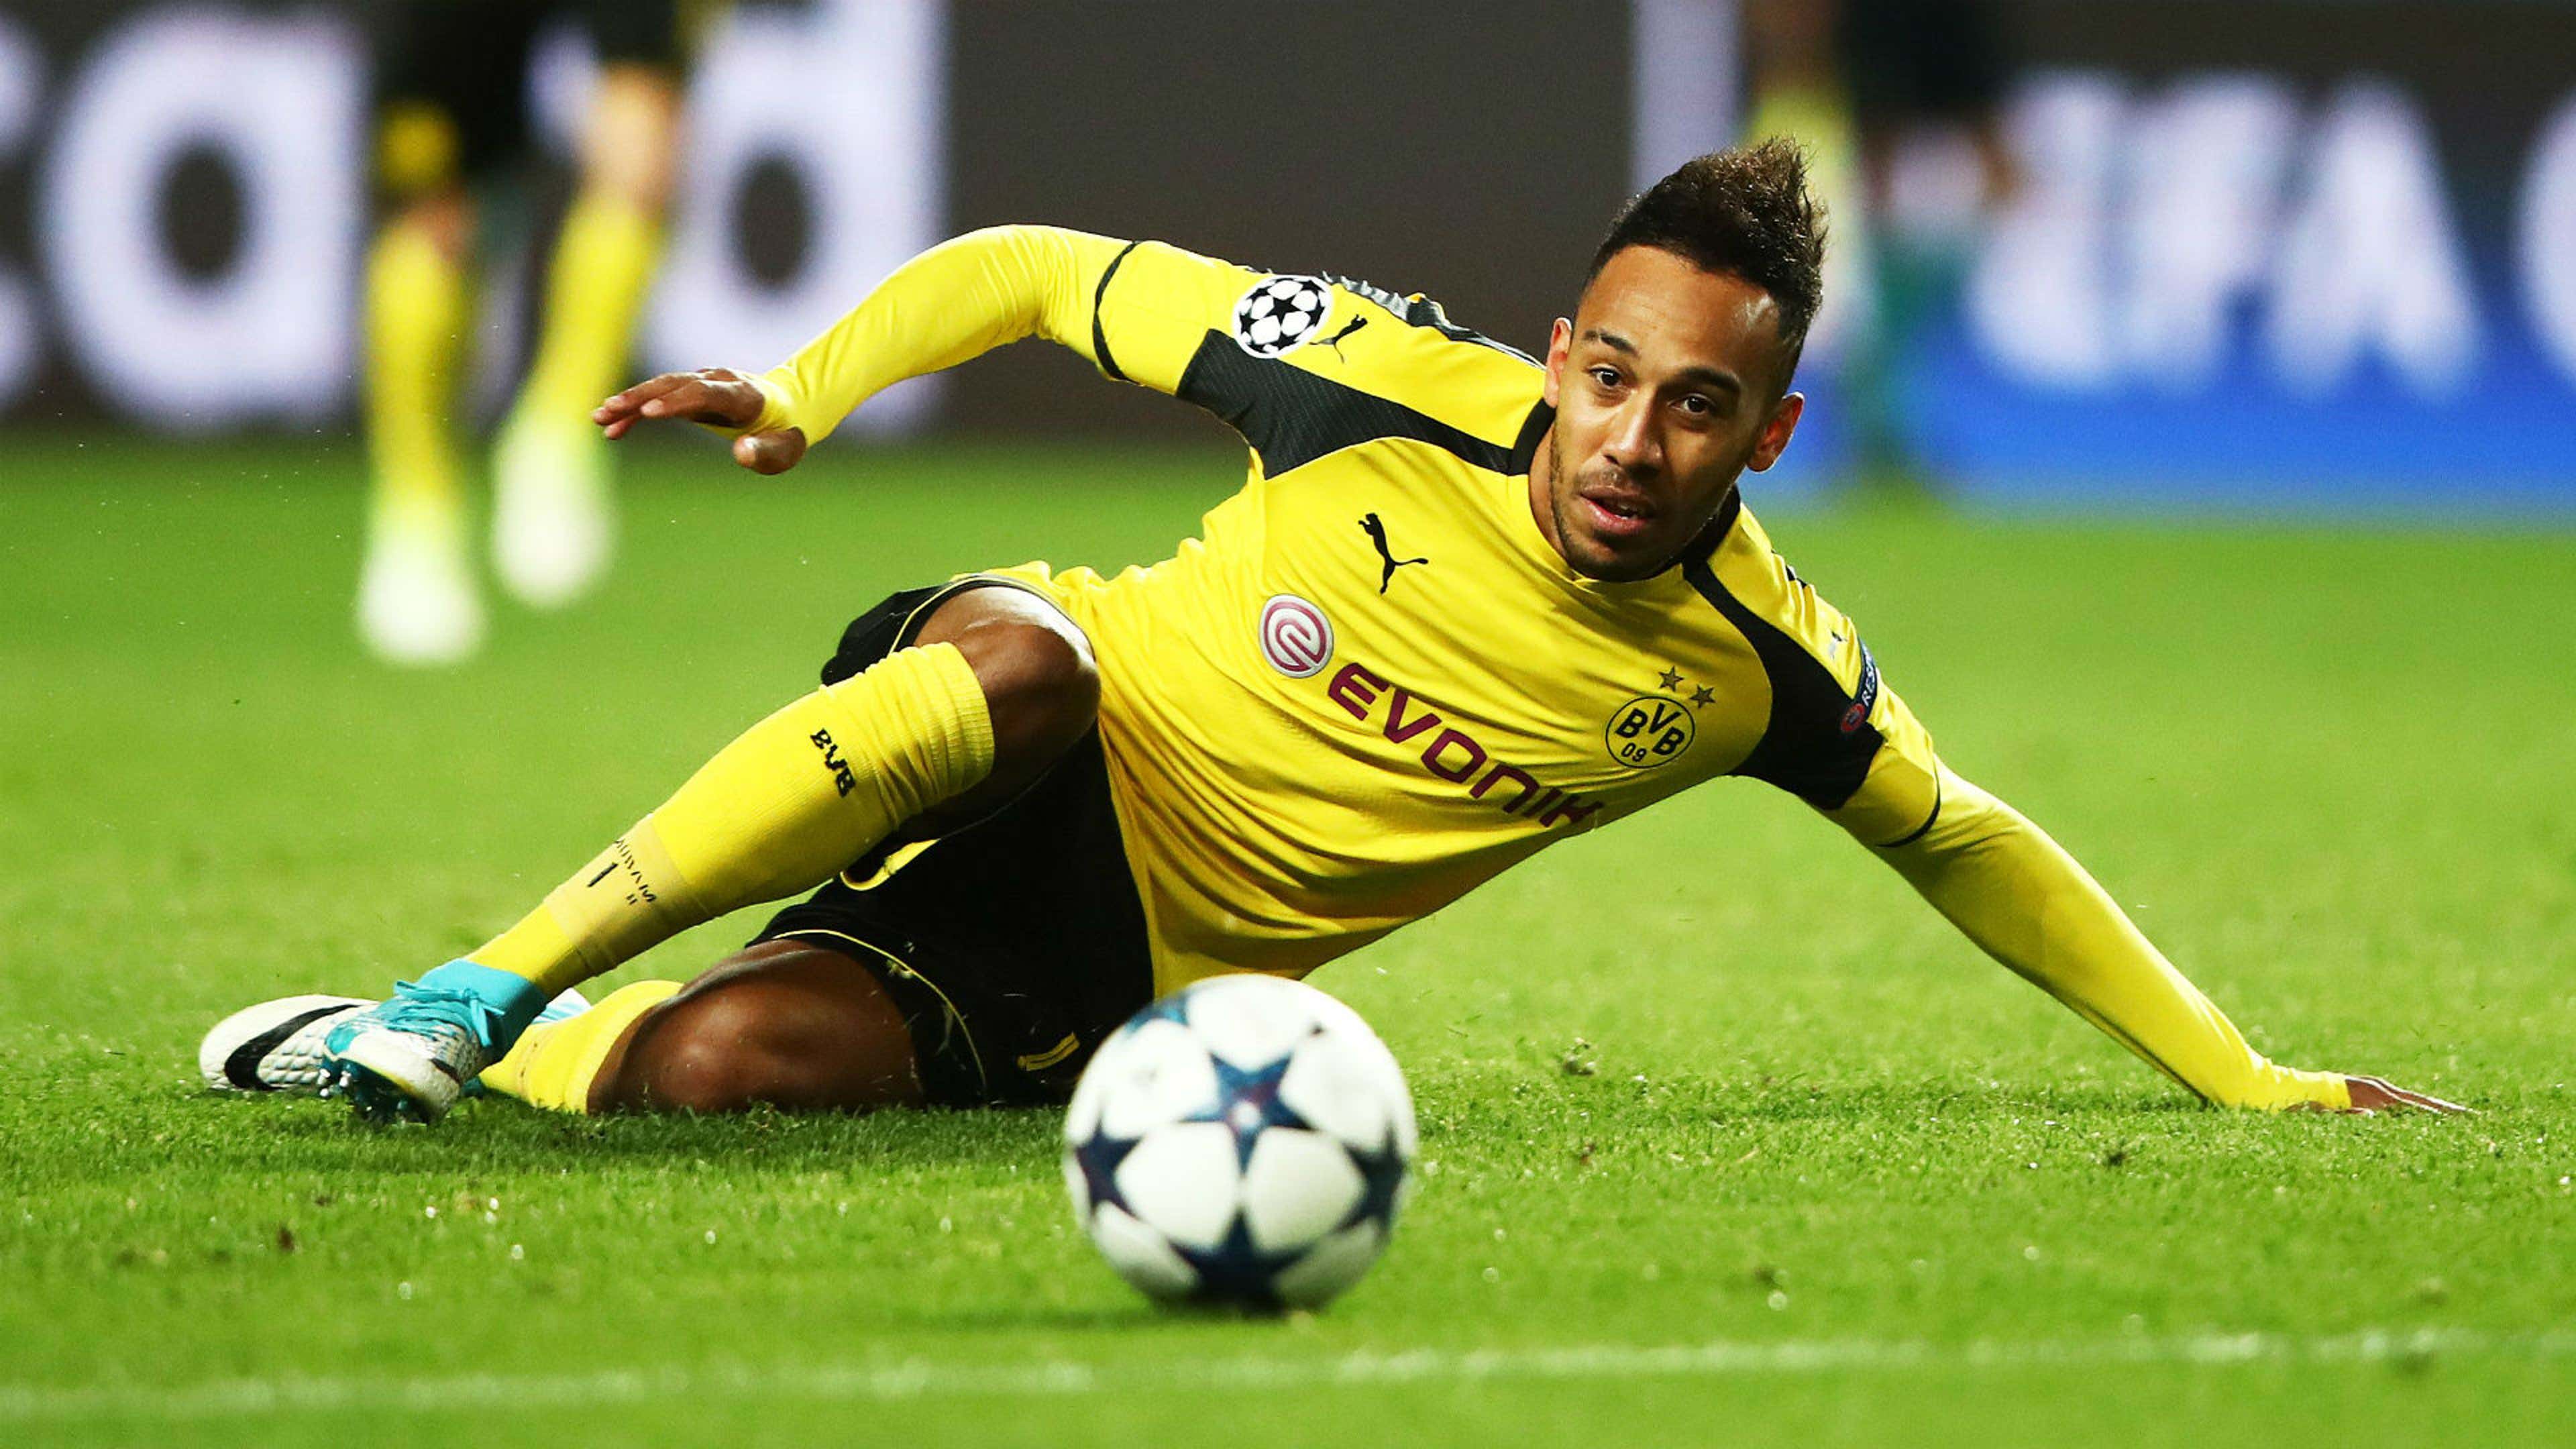 Aubameyang arrives at Dortmund from St-Etienne, UEFA Champions League